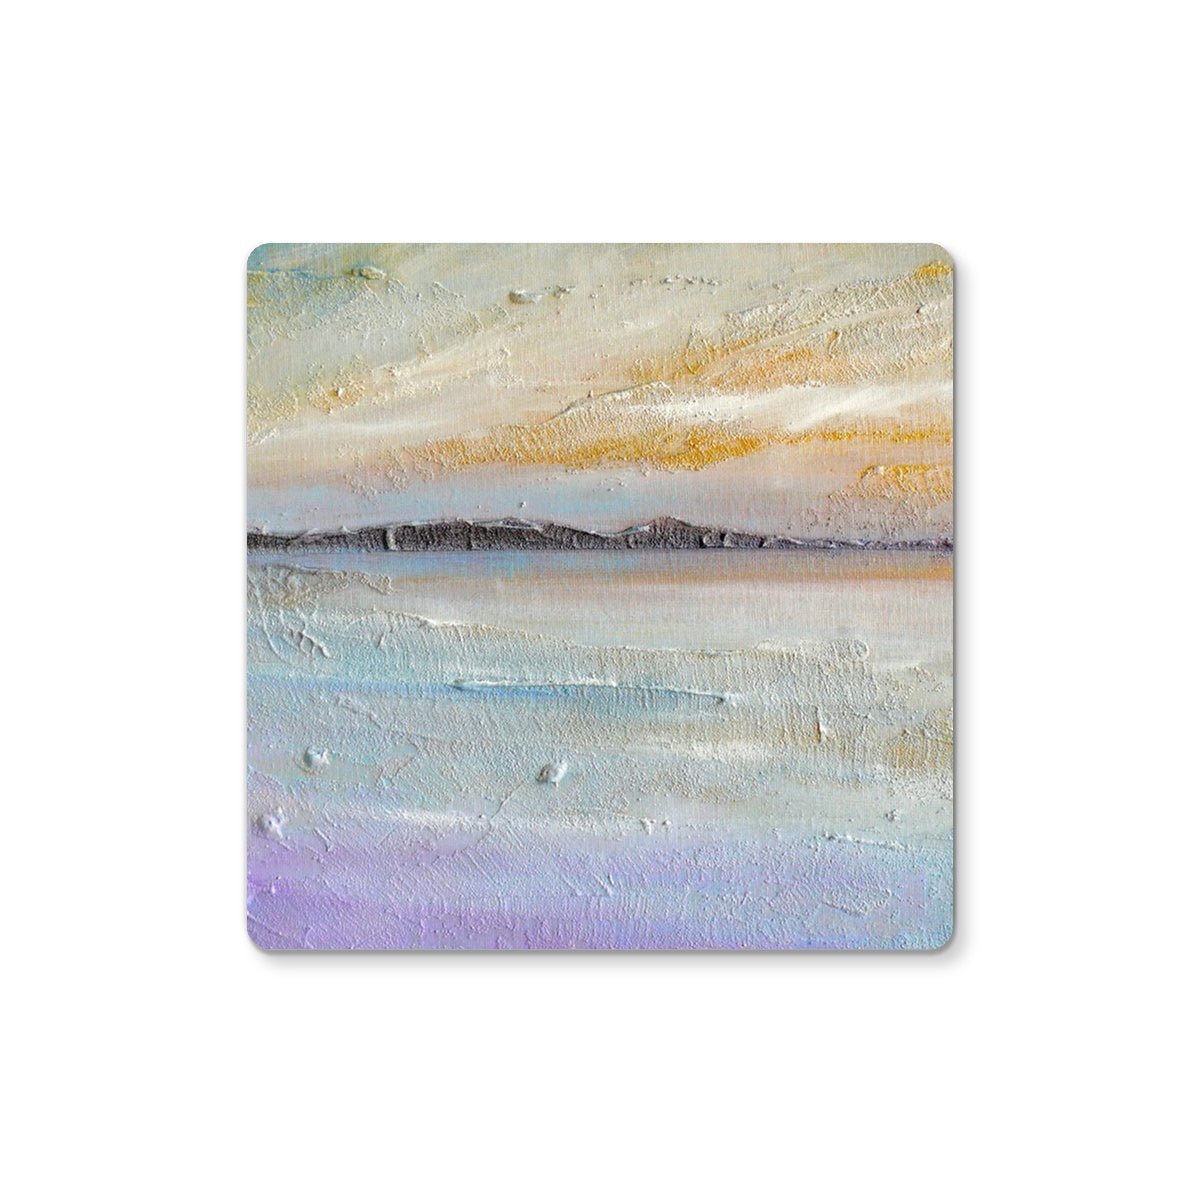 Sollas Beach North Uist Art Gifts Coaster-Coasters-Hebridean Islands Art Gallery-Single Coaster-Paintings, Prints, Homeware, Art Gifts From Scotland By Scottish Artist Kevin Hunter